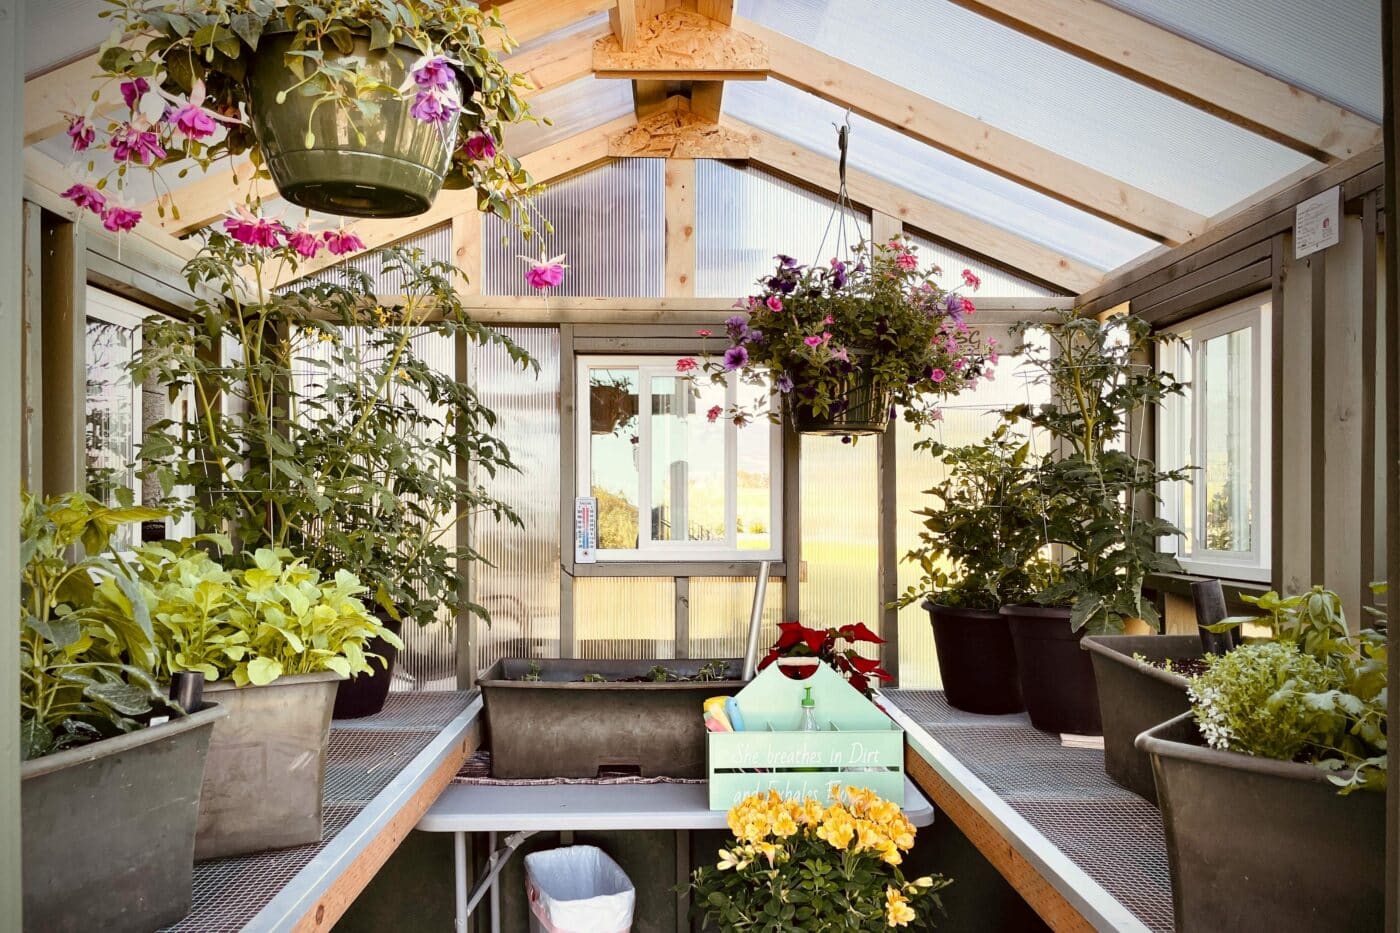 shed greenhouse interior edited 1